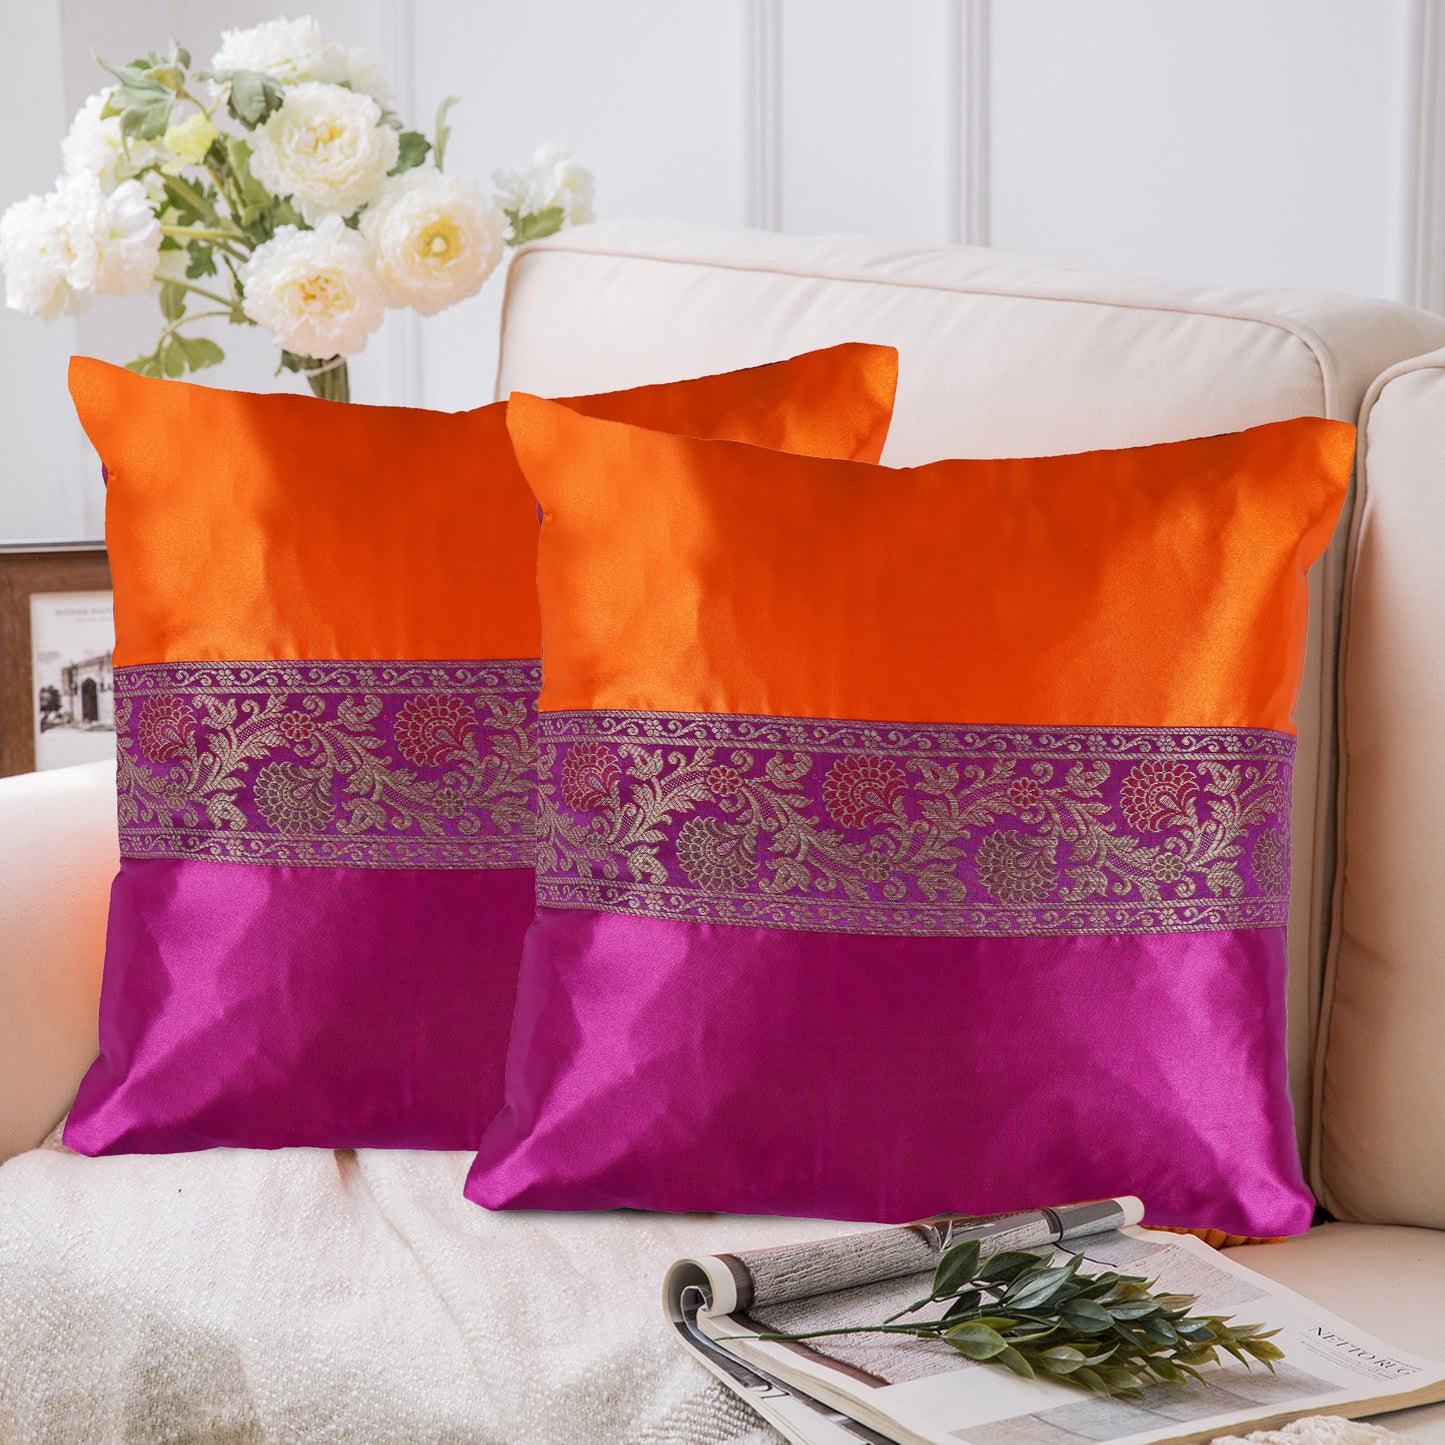 Set of 2 Pc Indian Solid Soft Silky Satin Orange & Magenta Pink Cushion Covers Square Throw Decorative Pillowcases for Couch Sofa Home Décor 16X16 In